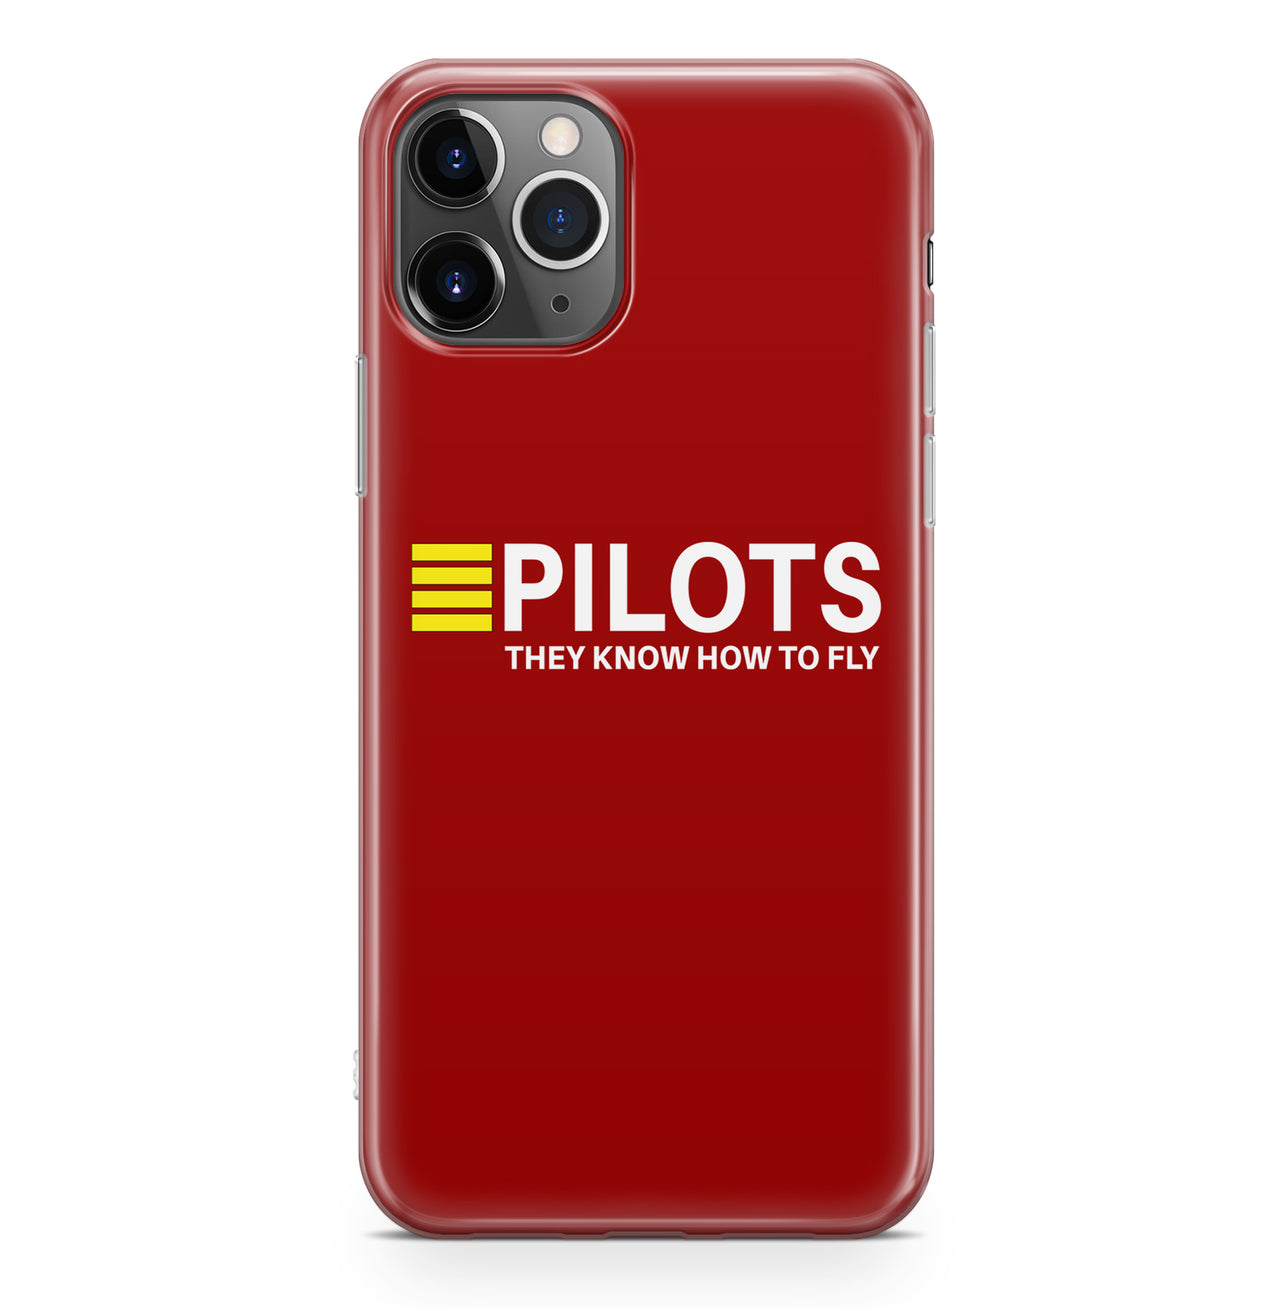 Pilots They Know How To Fly Designed iPhone Cases